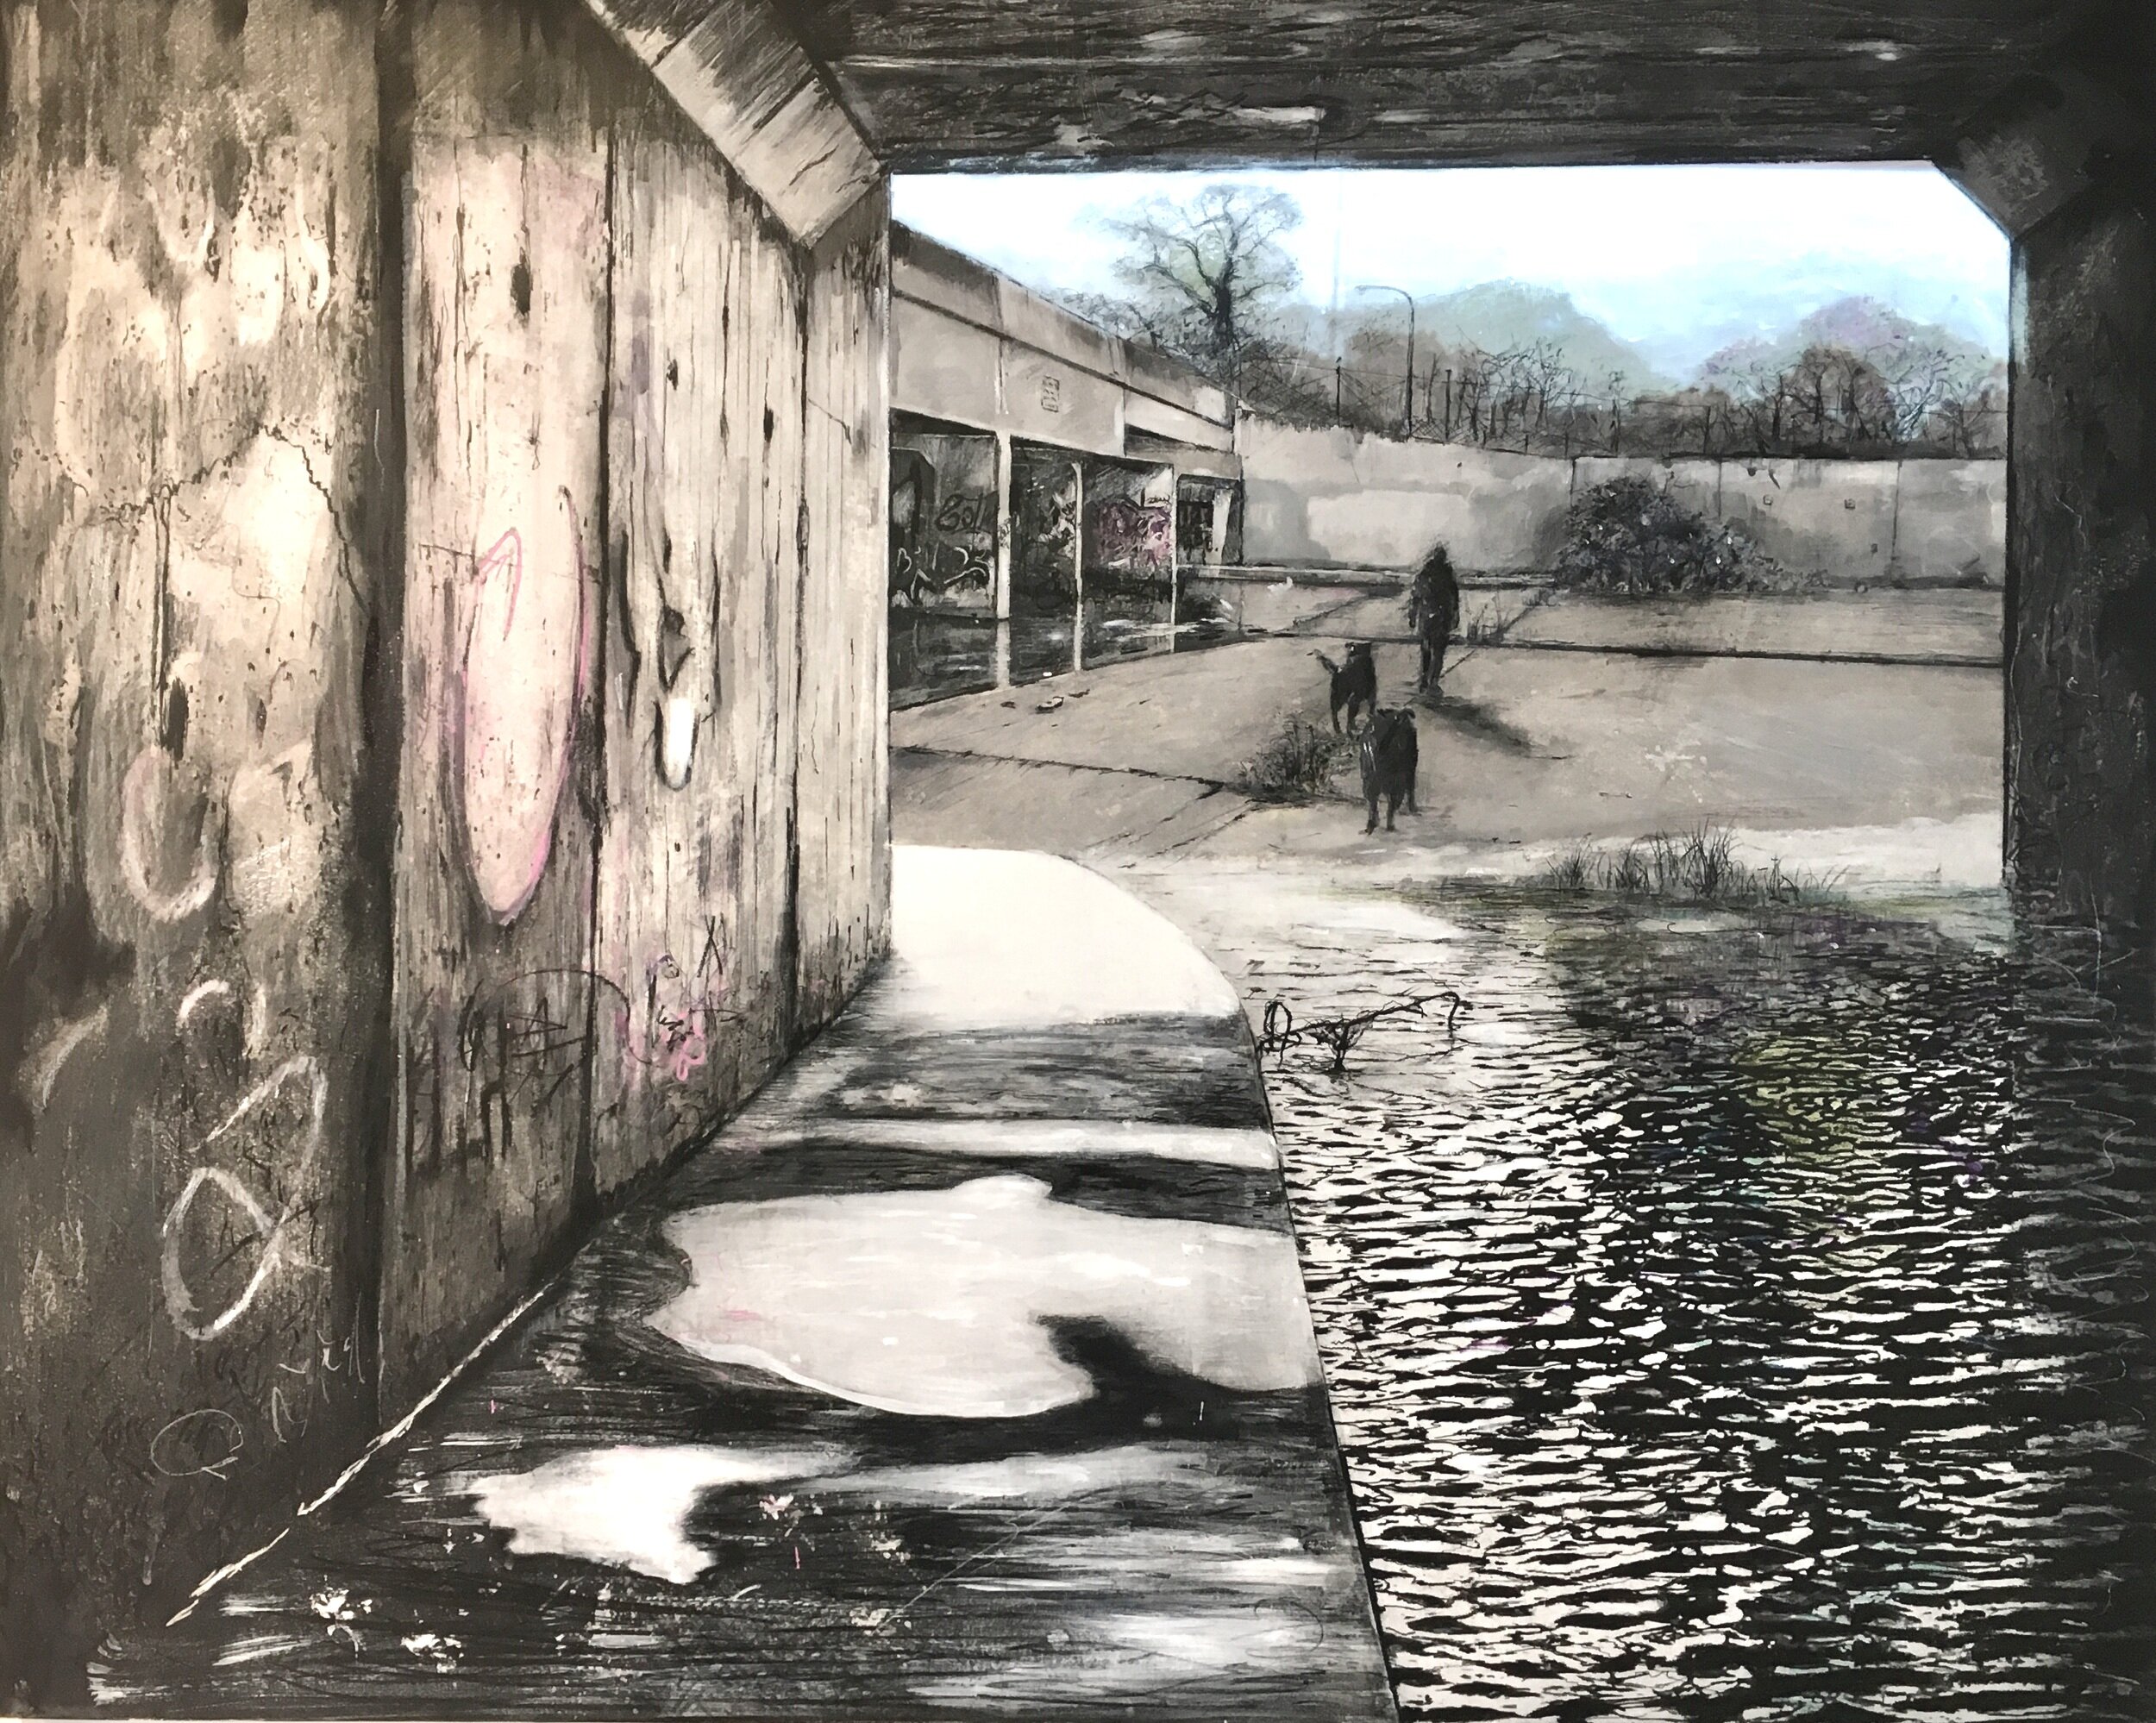   Only the landscape has changed  2019  pencils, charcoal, highlighters, ball point pen, spray paint on gesso hardboard with projections.  83 x 100 cm 